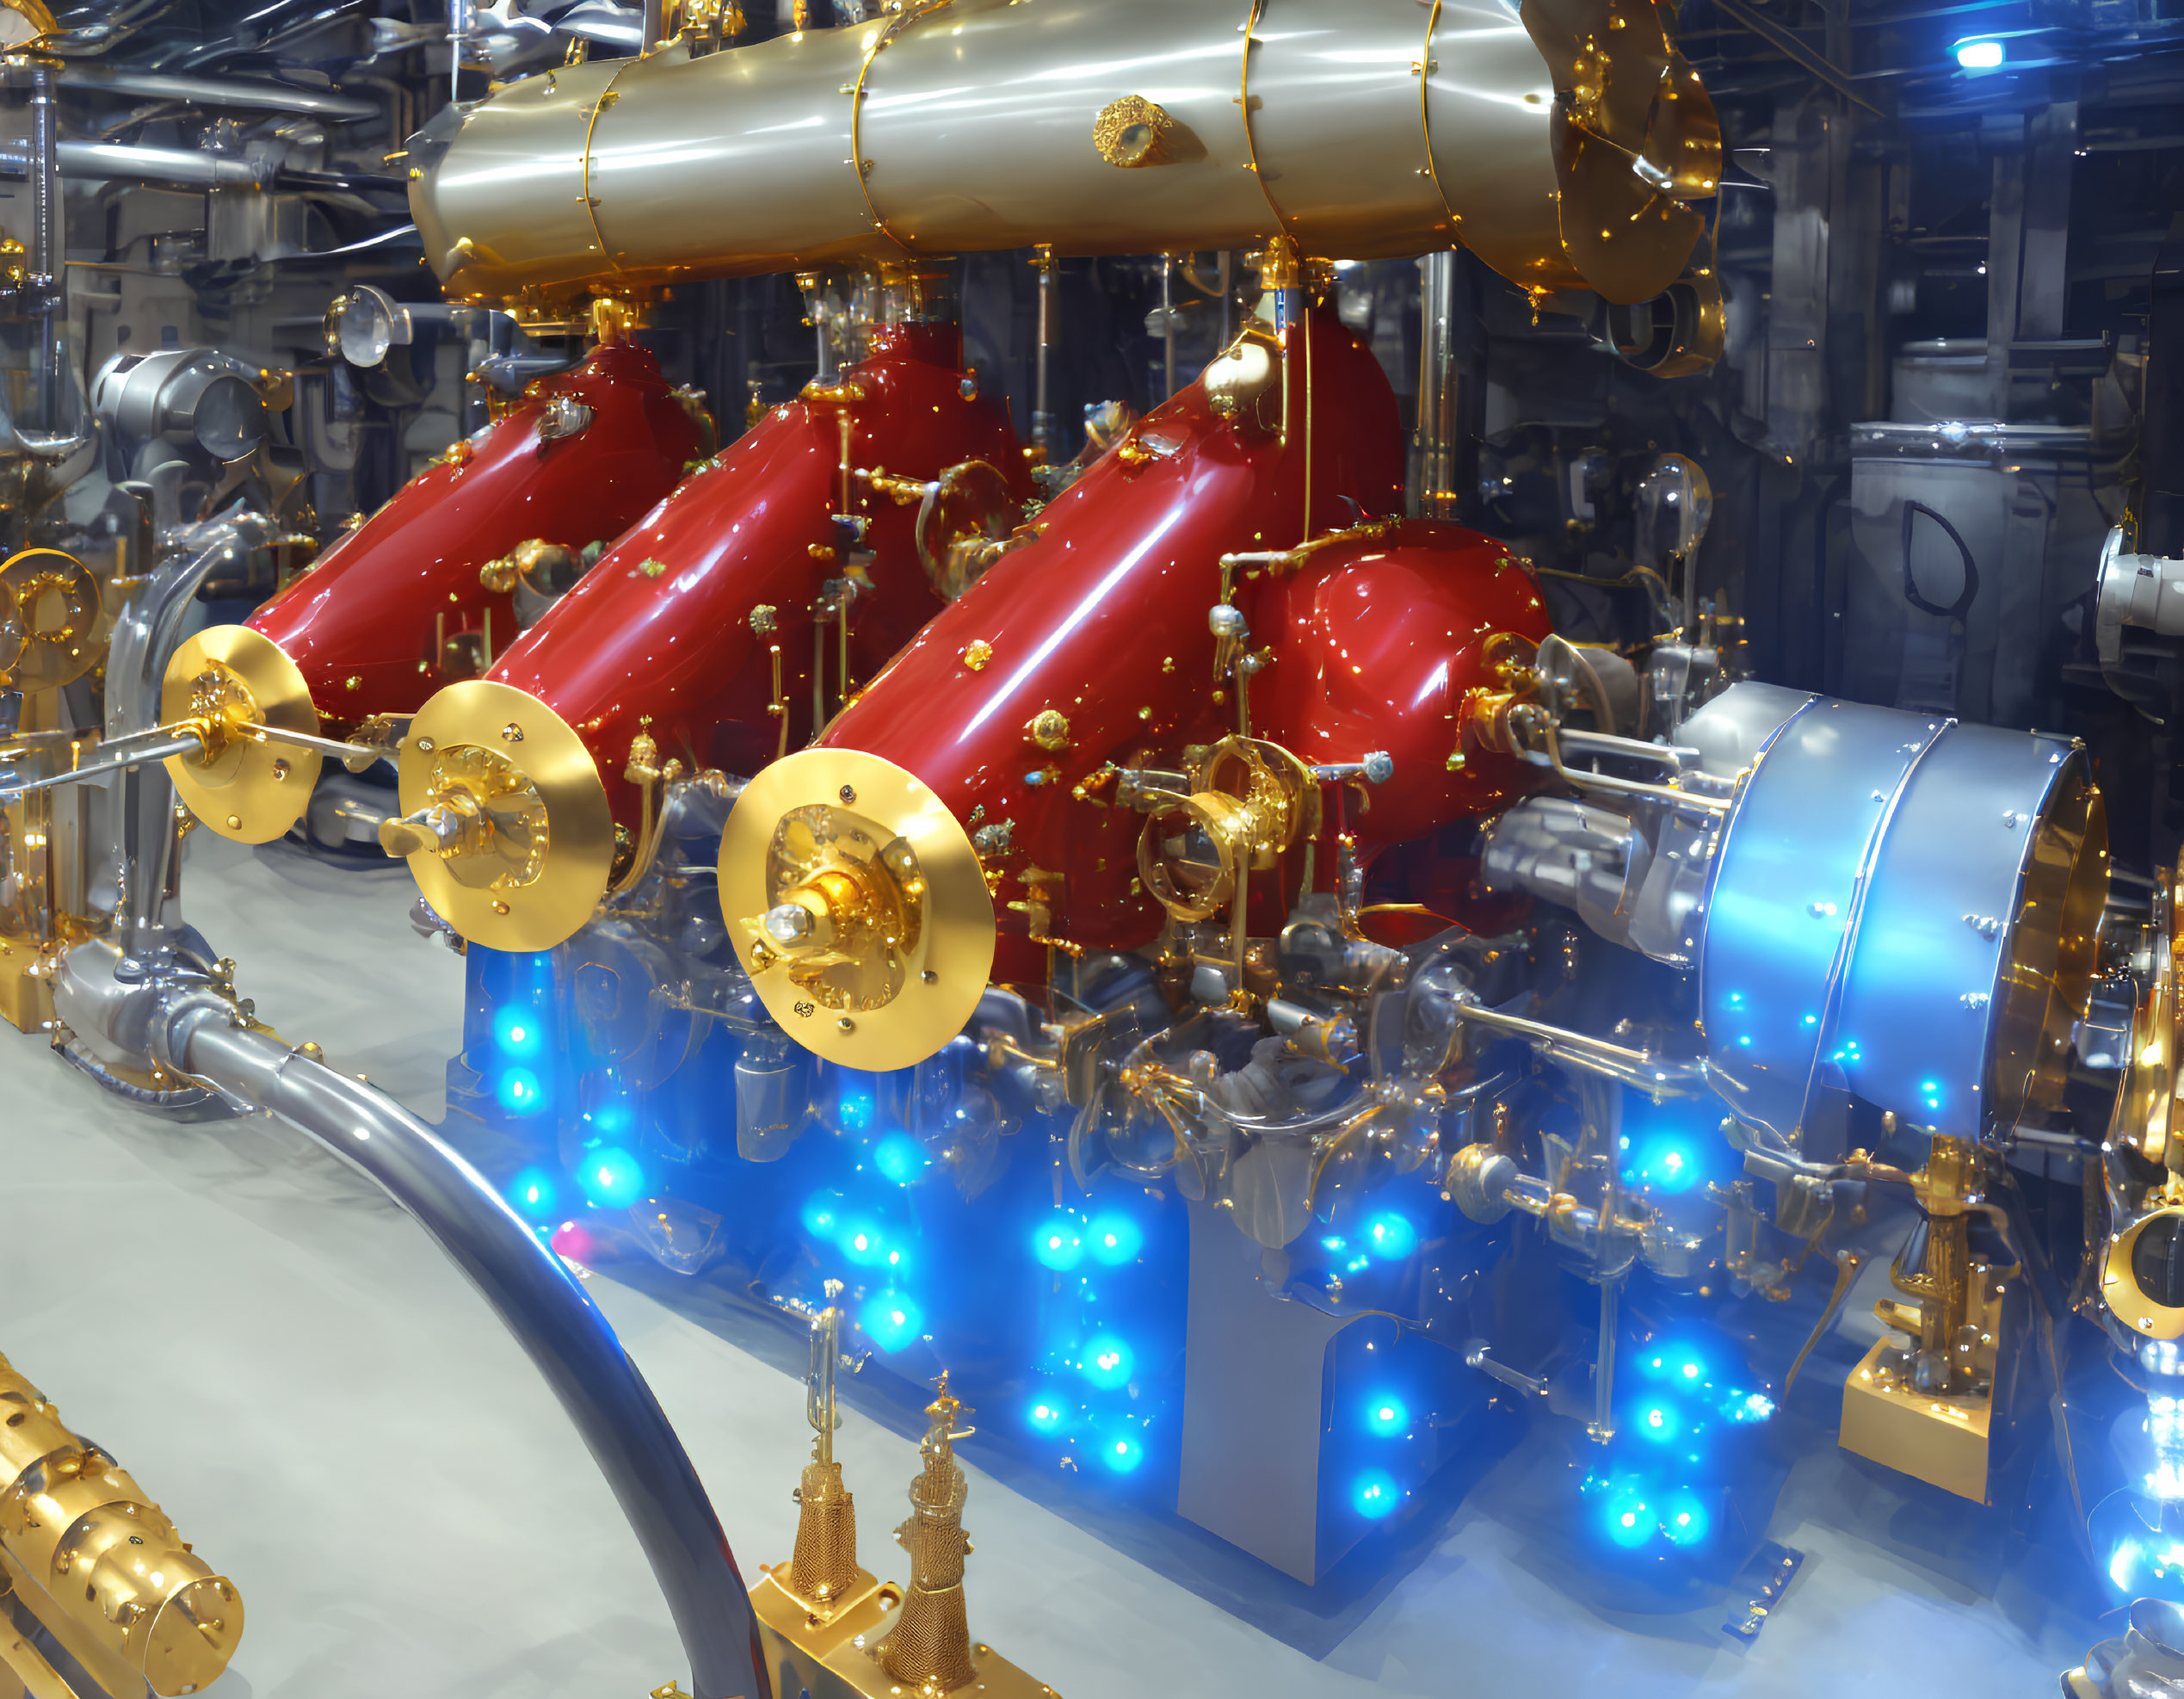 Sophisticated industrial setup with red cylinders, golden pipes, and blue illuminated machinery.